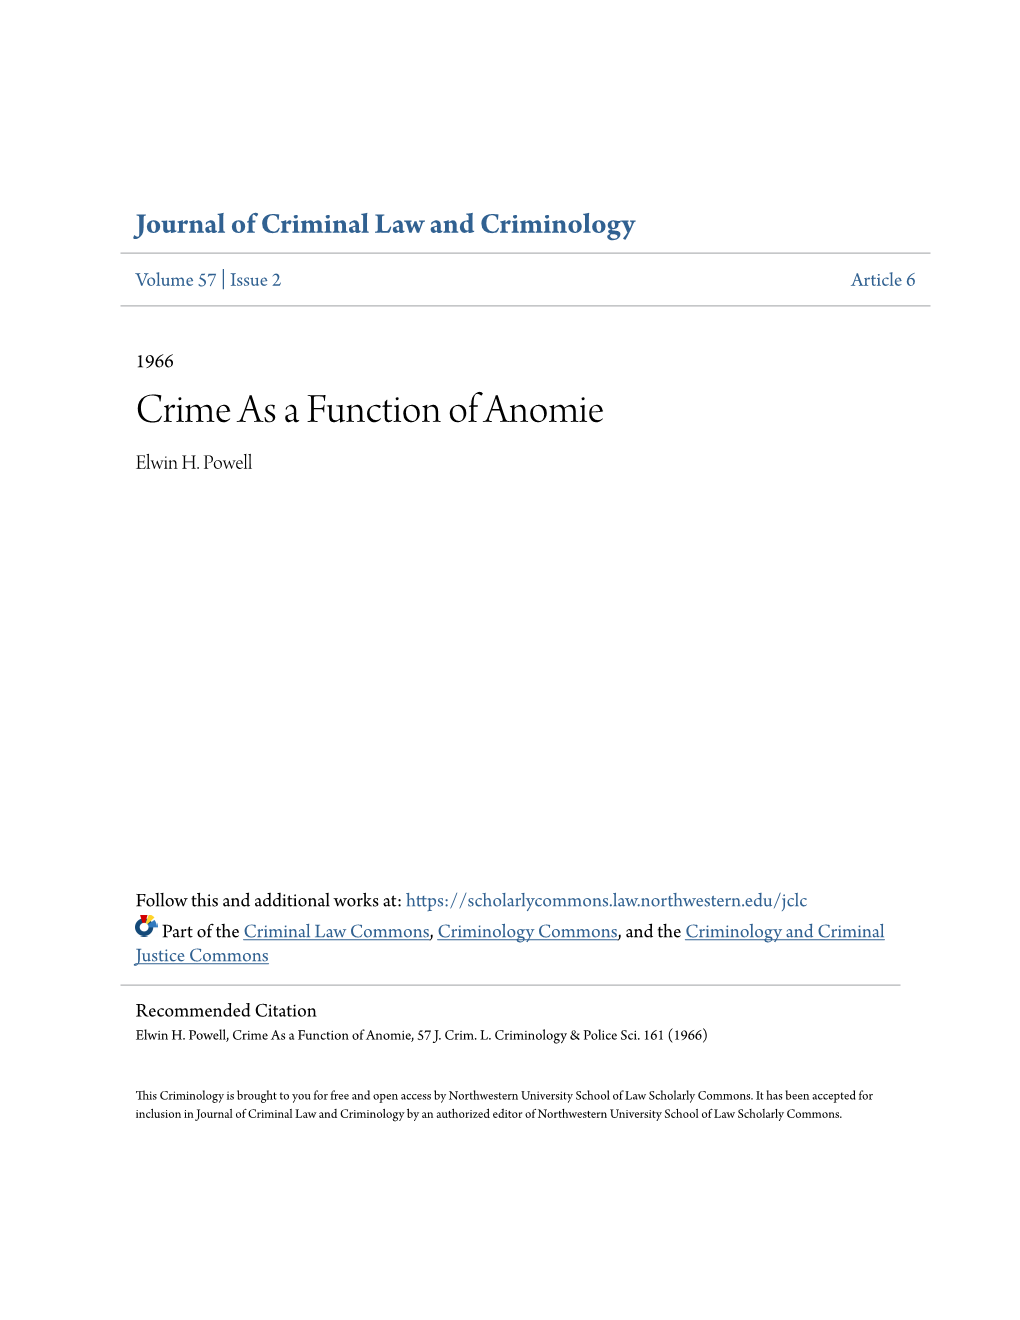 Crime As a Function of Anomie Elwin H